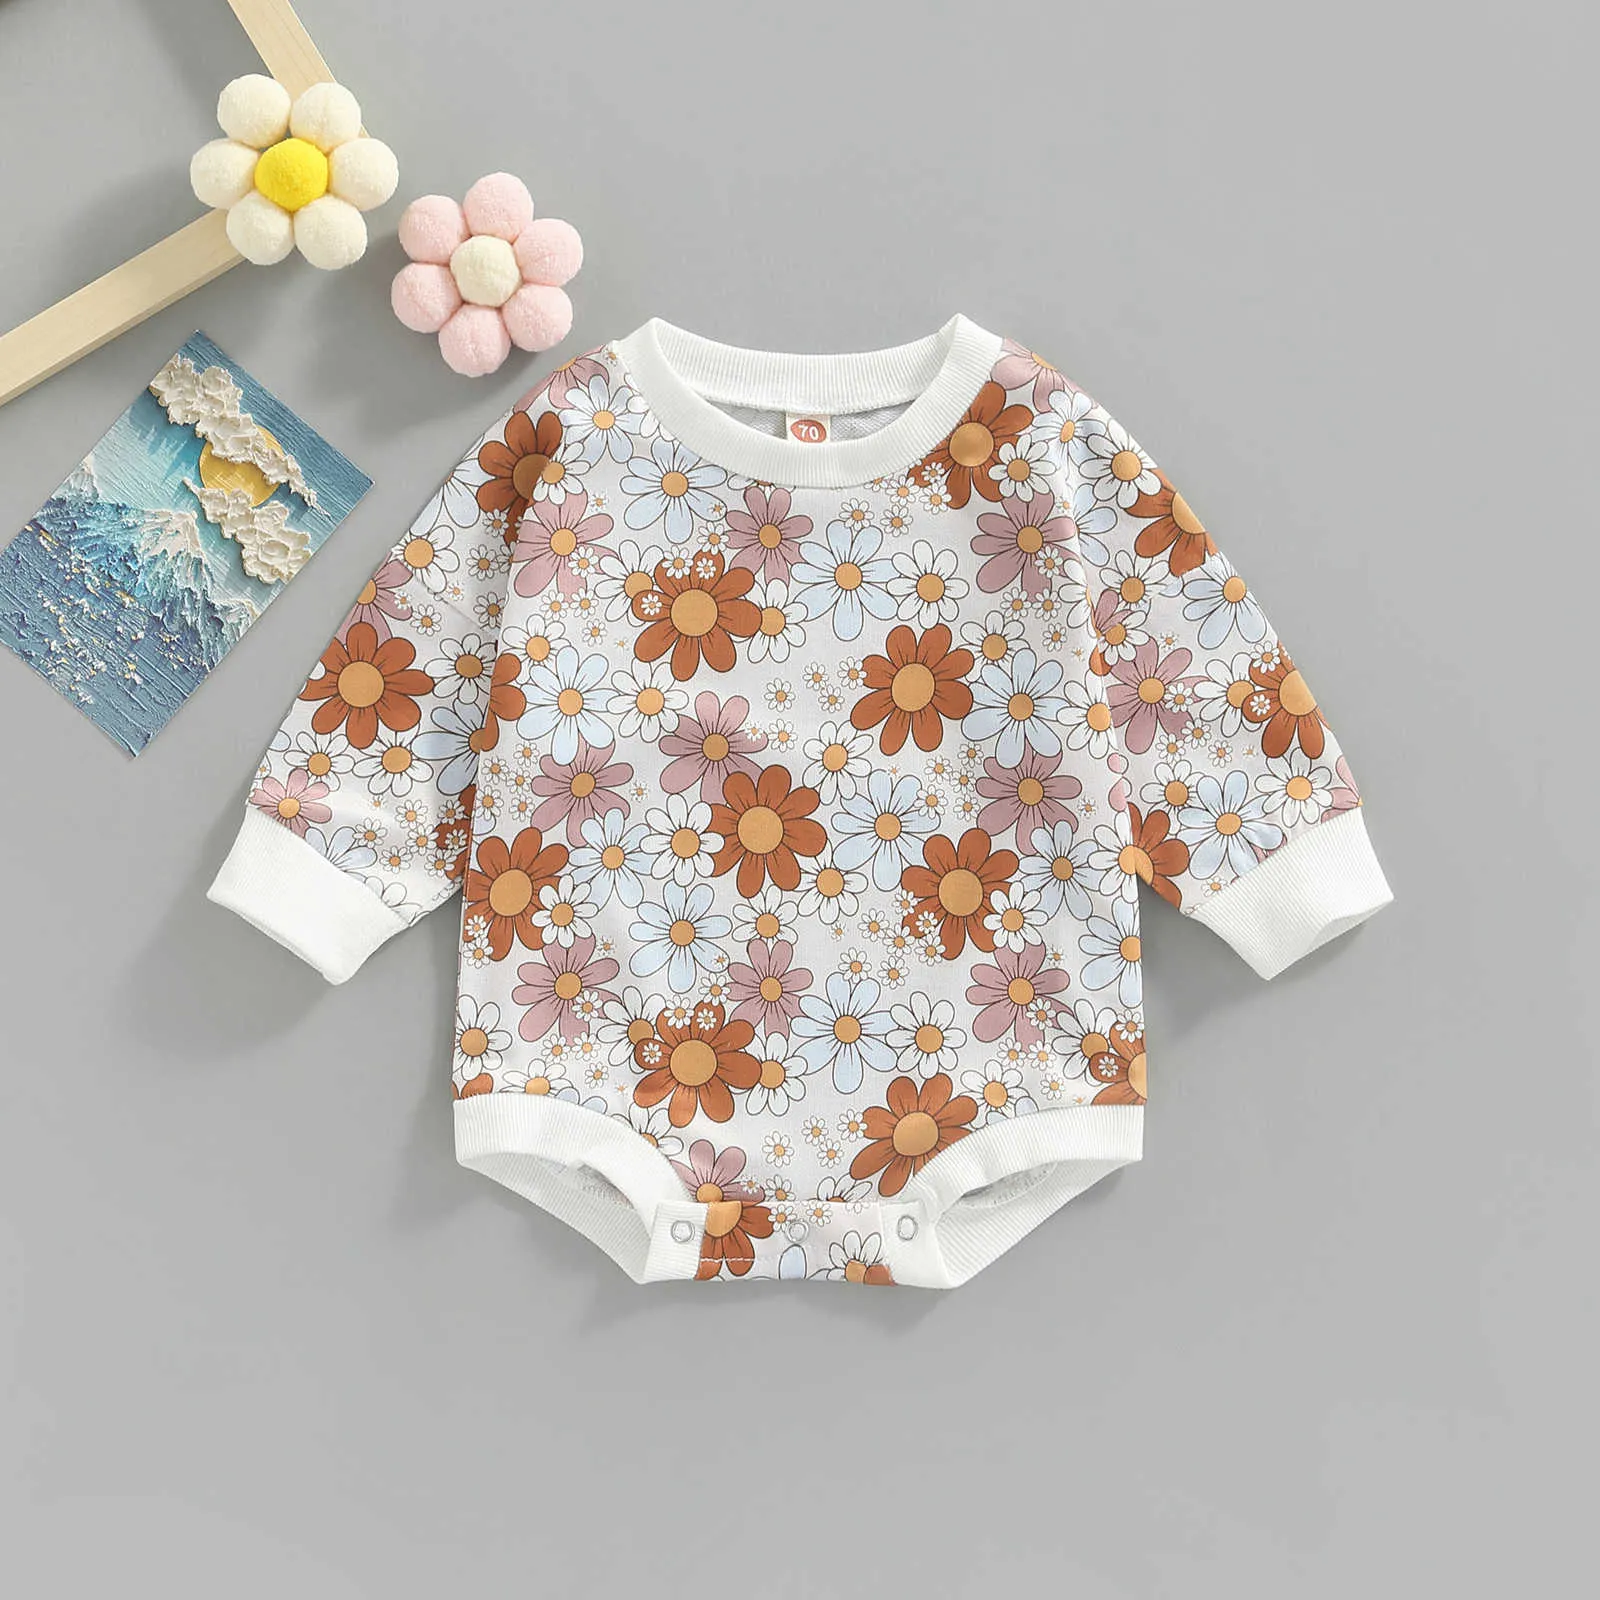 Rompers Fashion Baby Girl Rompers Autumn Cotton Long Sleeve Floral Print Newborn Baby Clothing Baby Clothes Jumpsuits For 02Y J220922